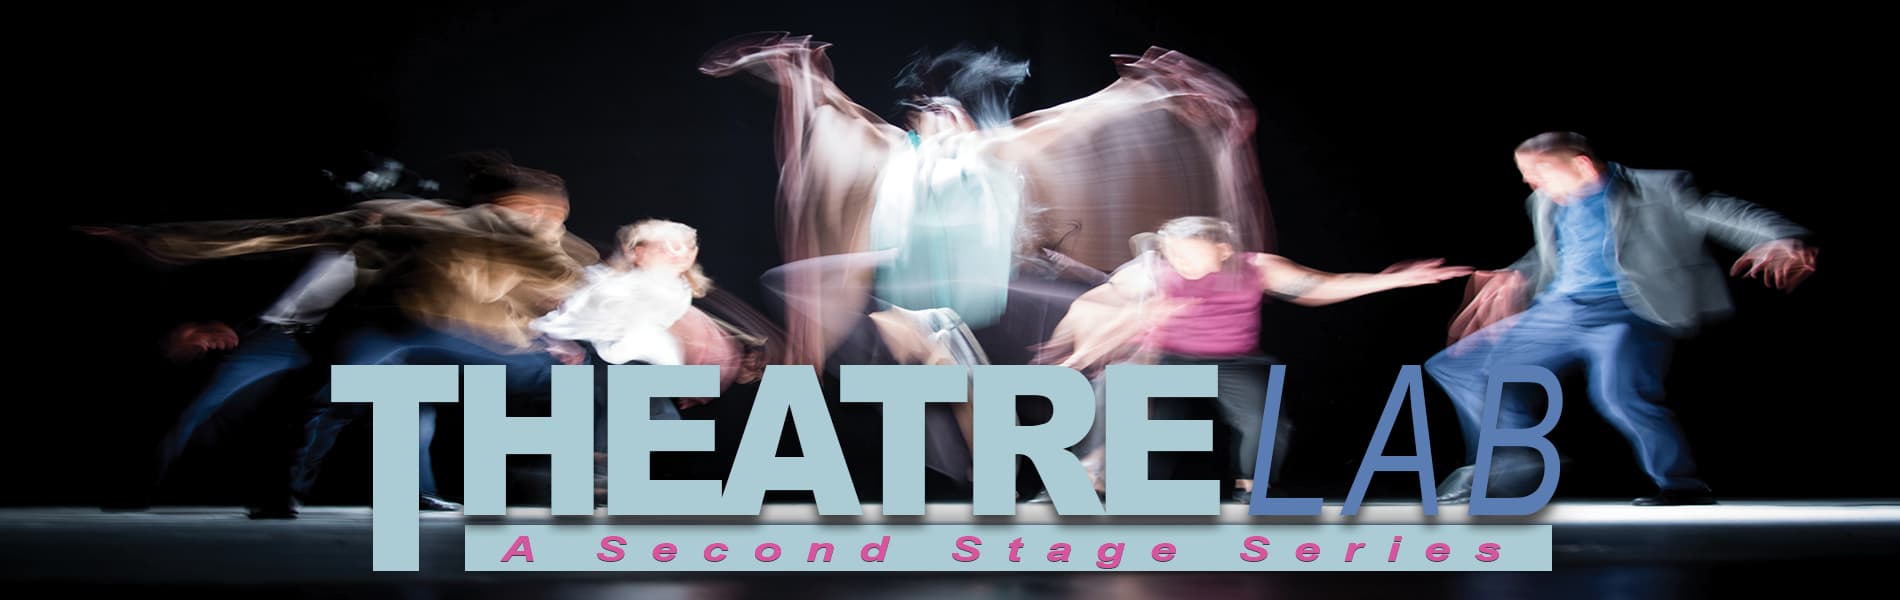 Image of actors in motion on a stage